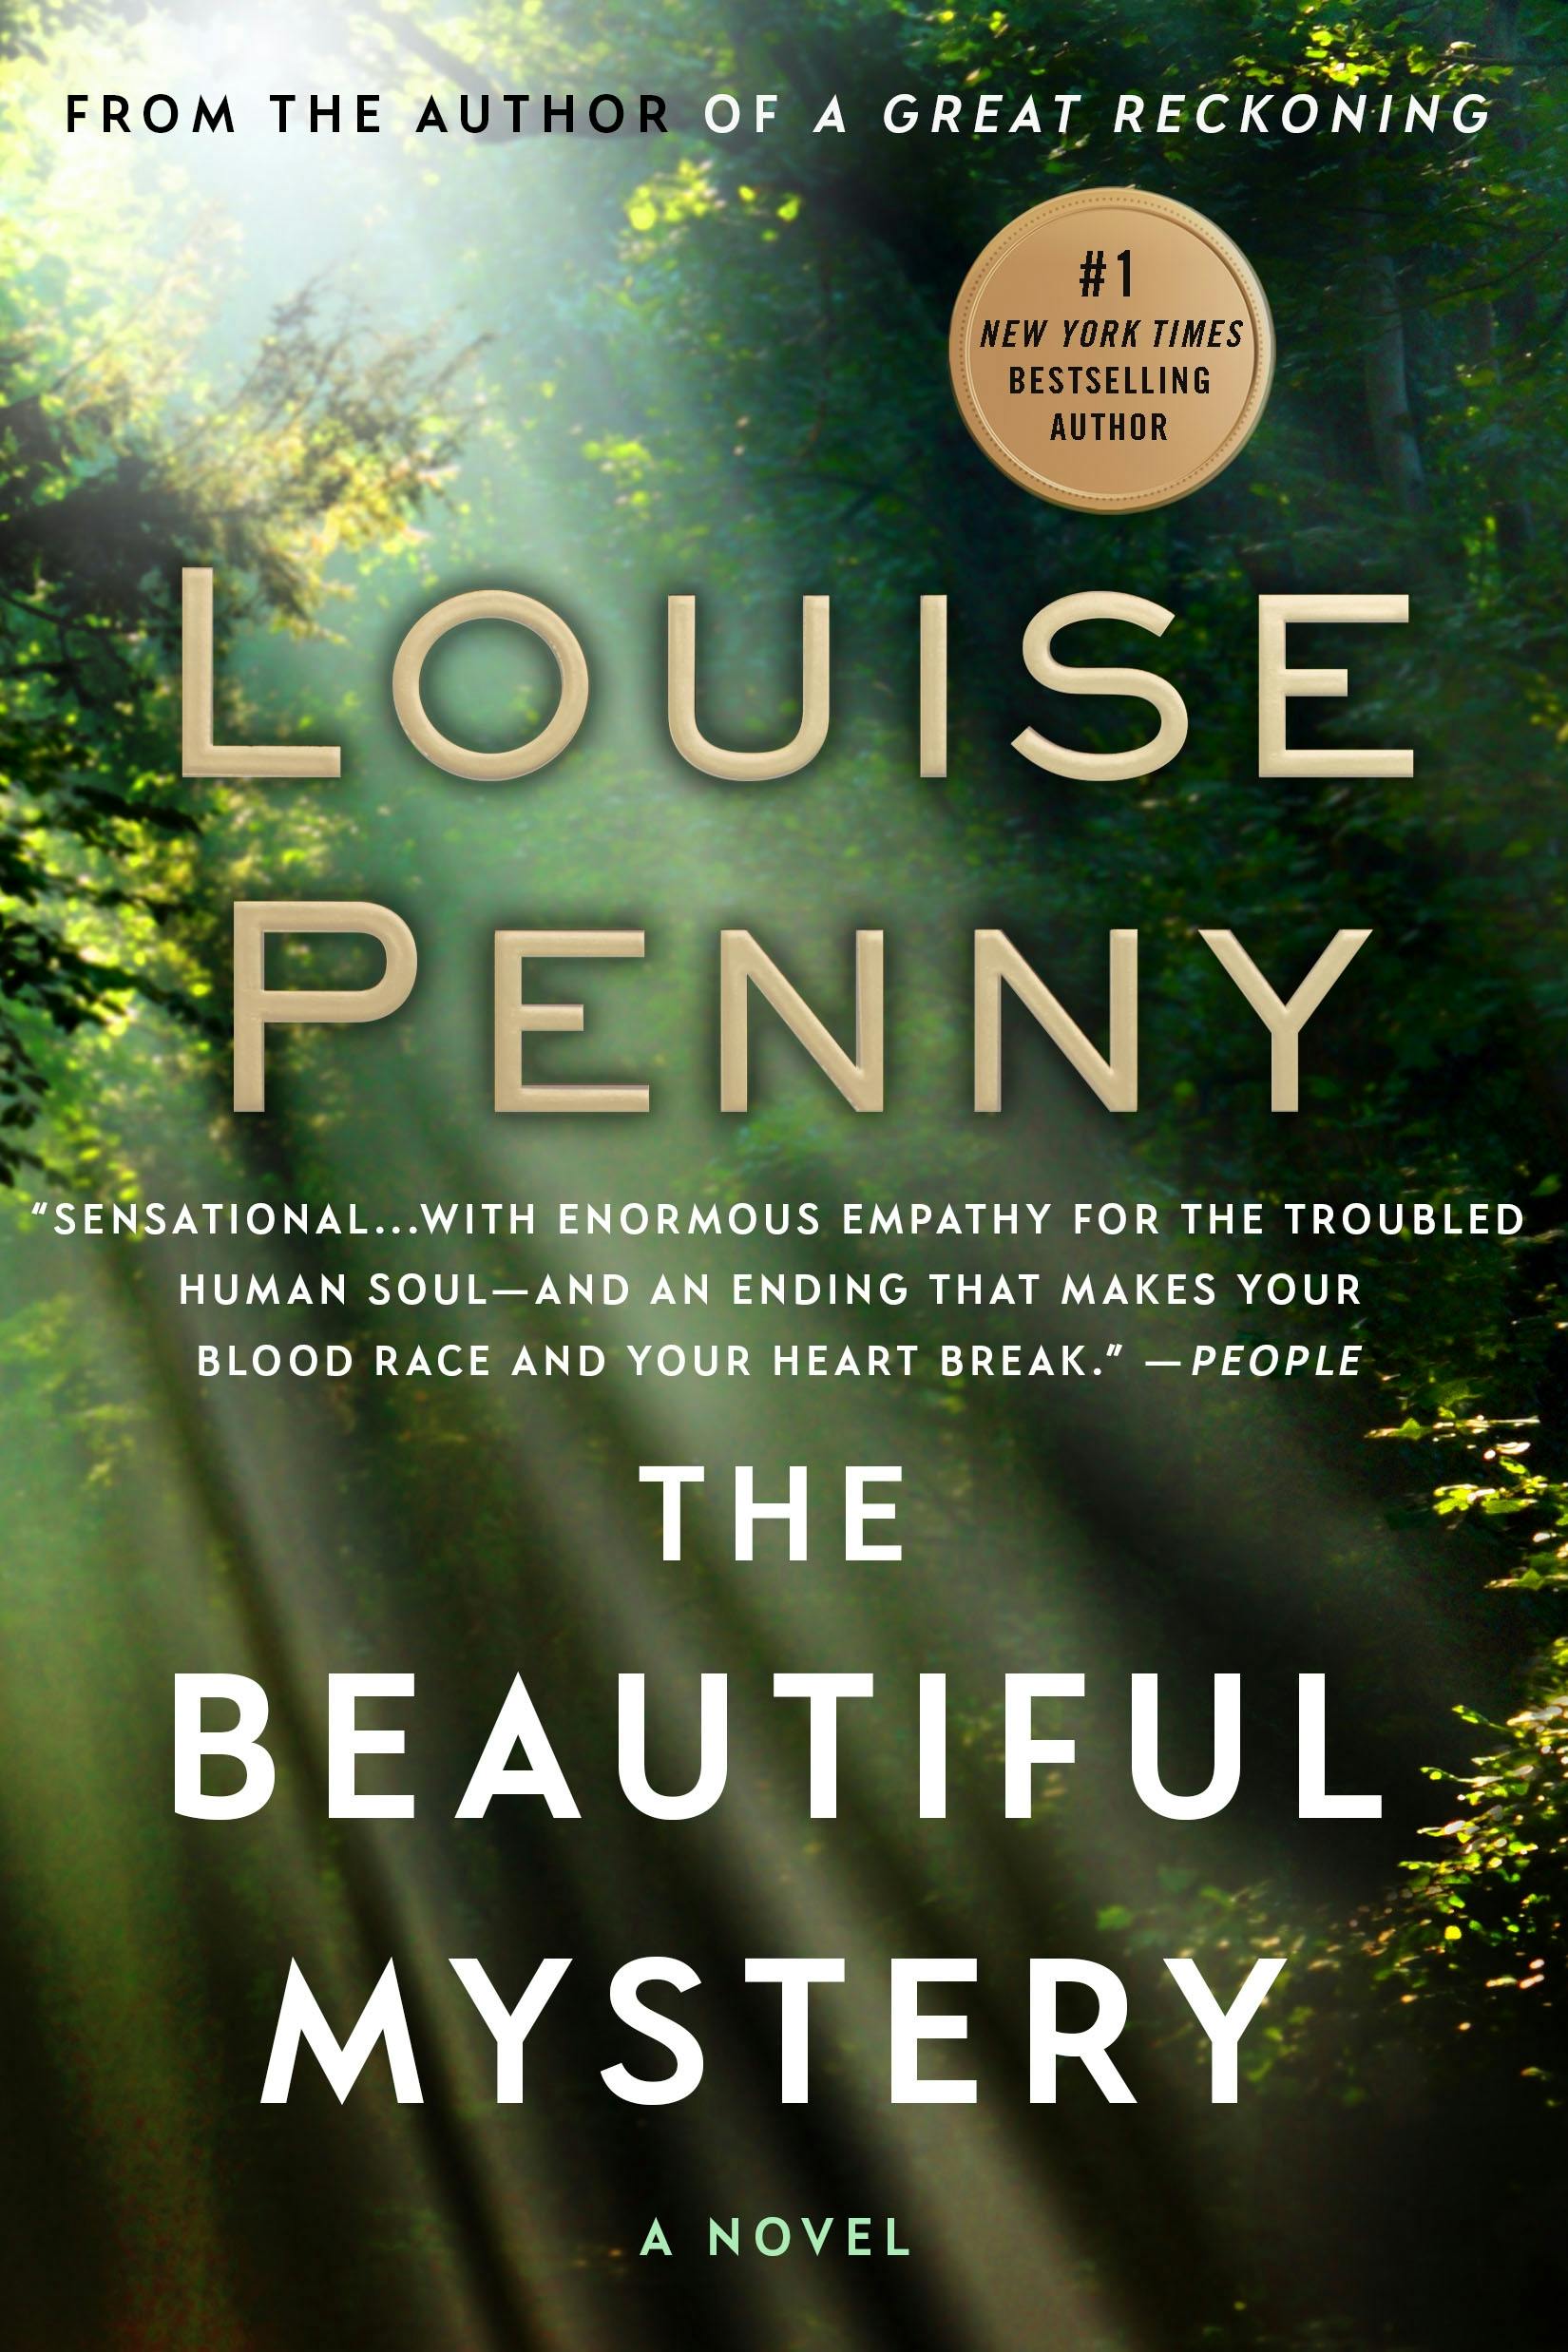 Kingdom of the Blind by Louise Penny - The Gilmore Guide to Books